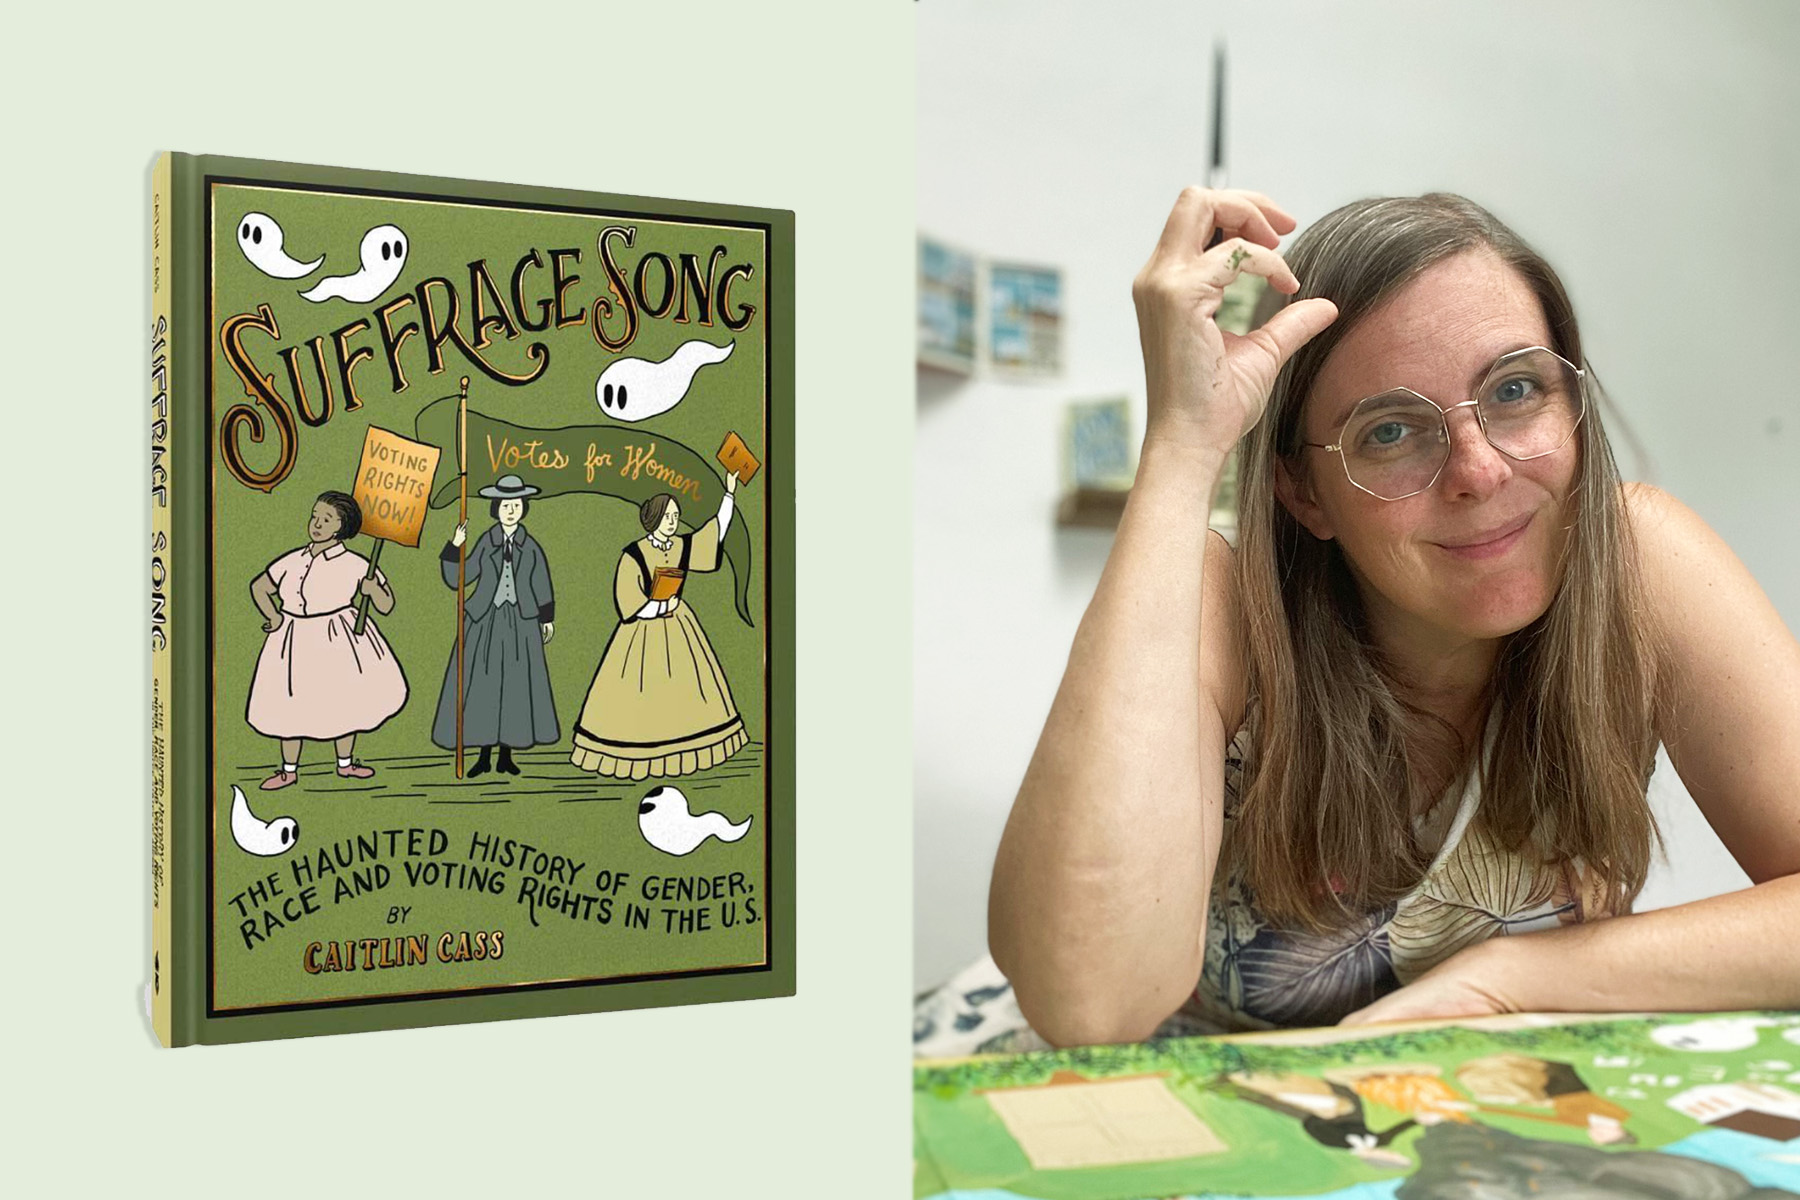 Diptych of Caitlin Cass's graphic nonfiction book "Suffrage Song" on the left and the author's portrait on the right. She is seen smiling and painting.